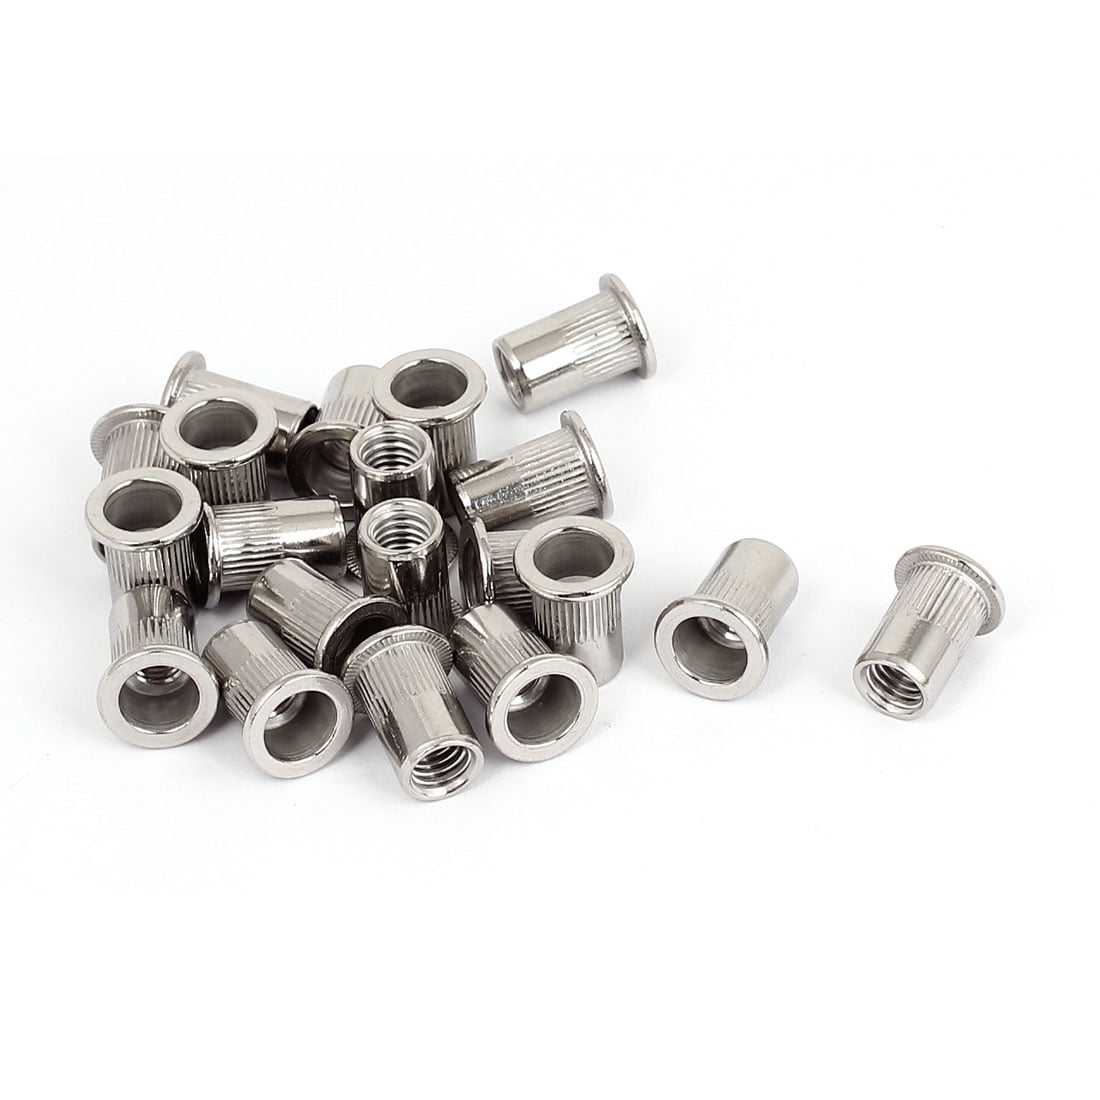 Details about   Box Packaging Stainless Steel Insert Nut Set Rivet Nut Set For Switches 